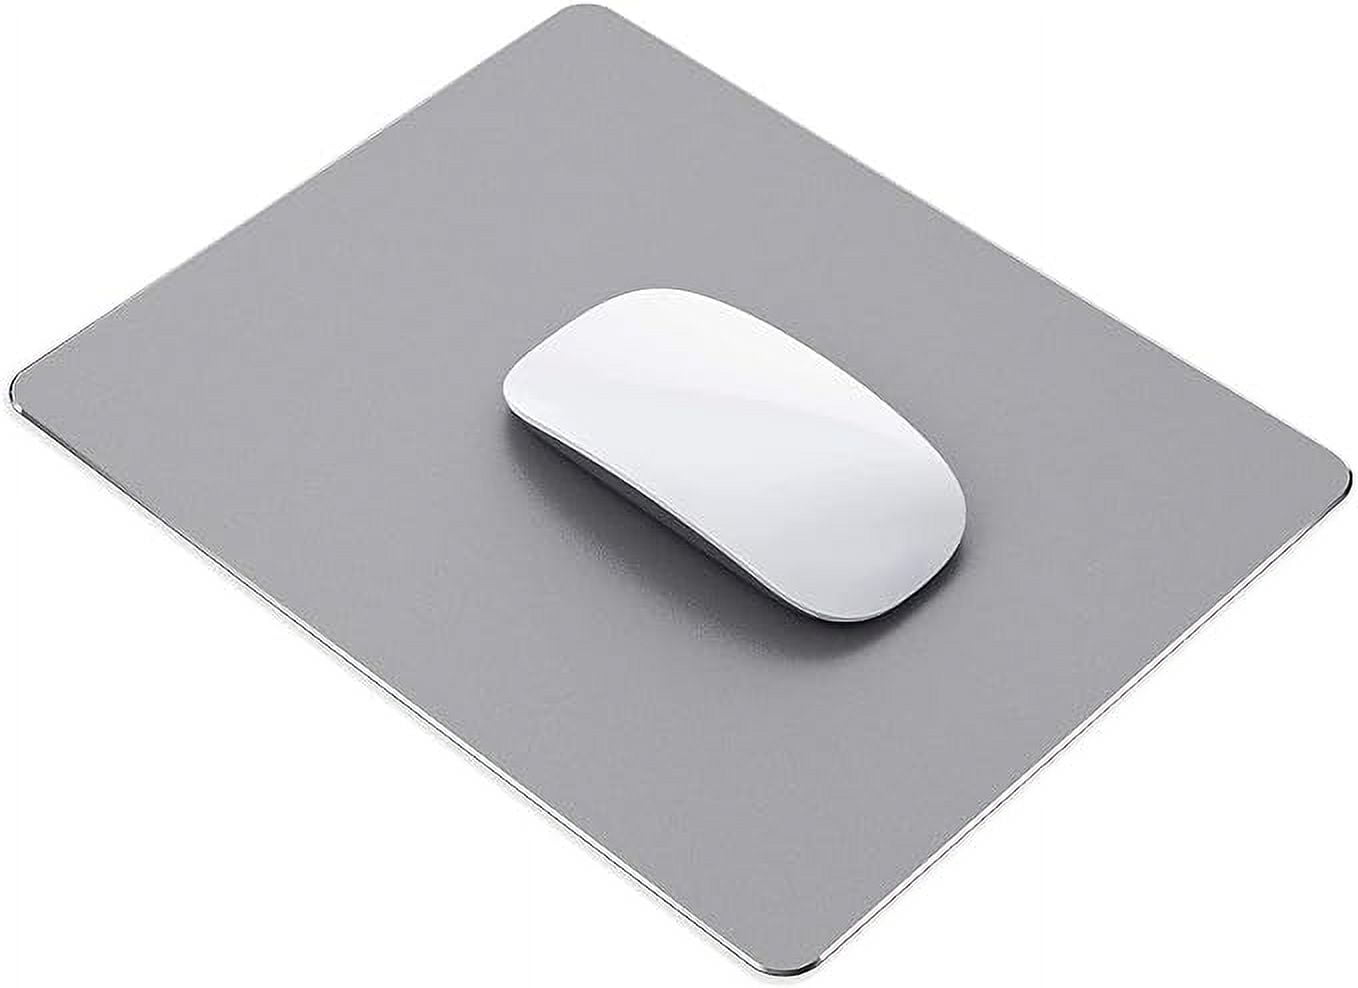 Metal Aluminum Mouse Pad,Hard Magical Mouse Pads,Double-Sided